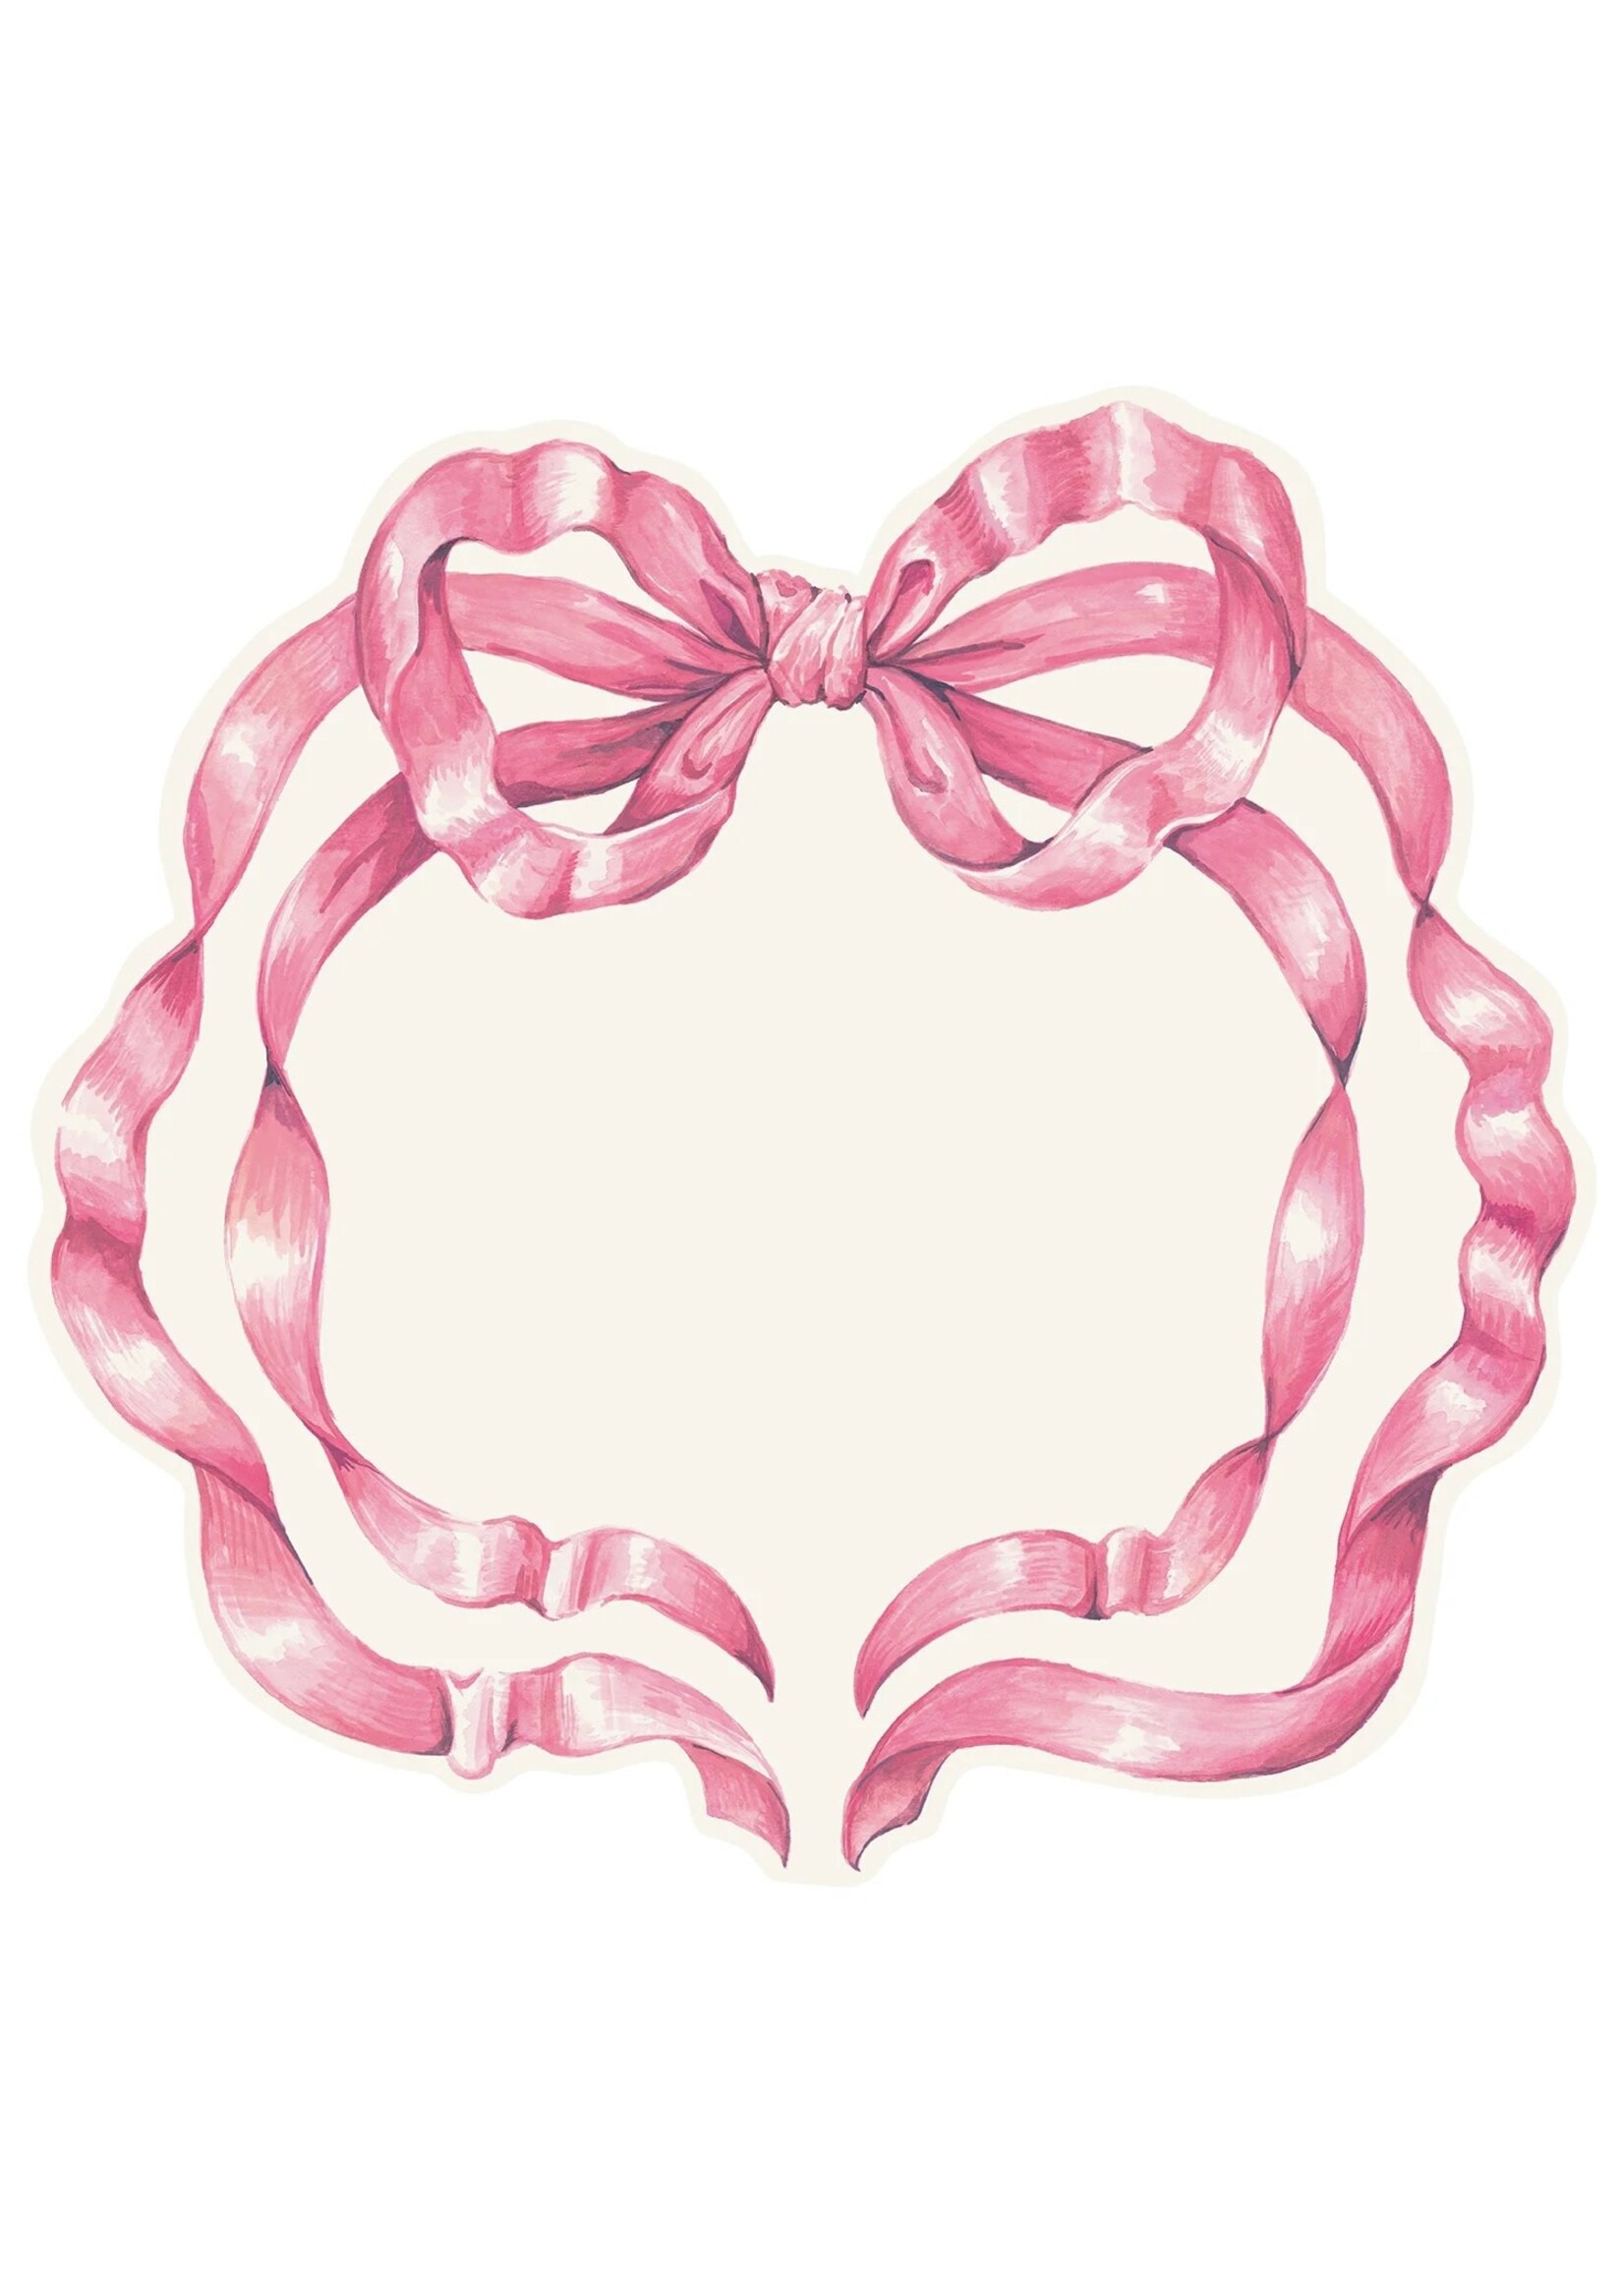 Hester & Cook Paper Placemats - Pink Bow (12 sheets)